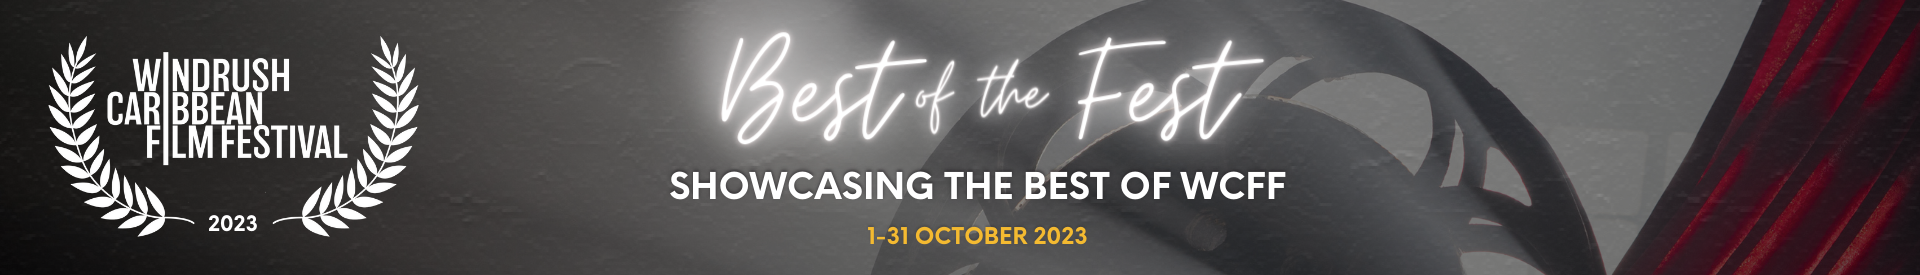 Best of the Fest 2023